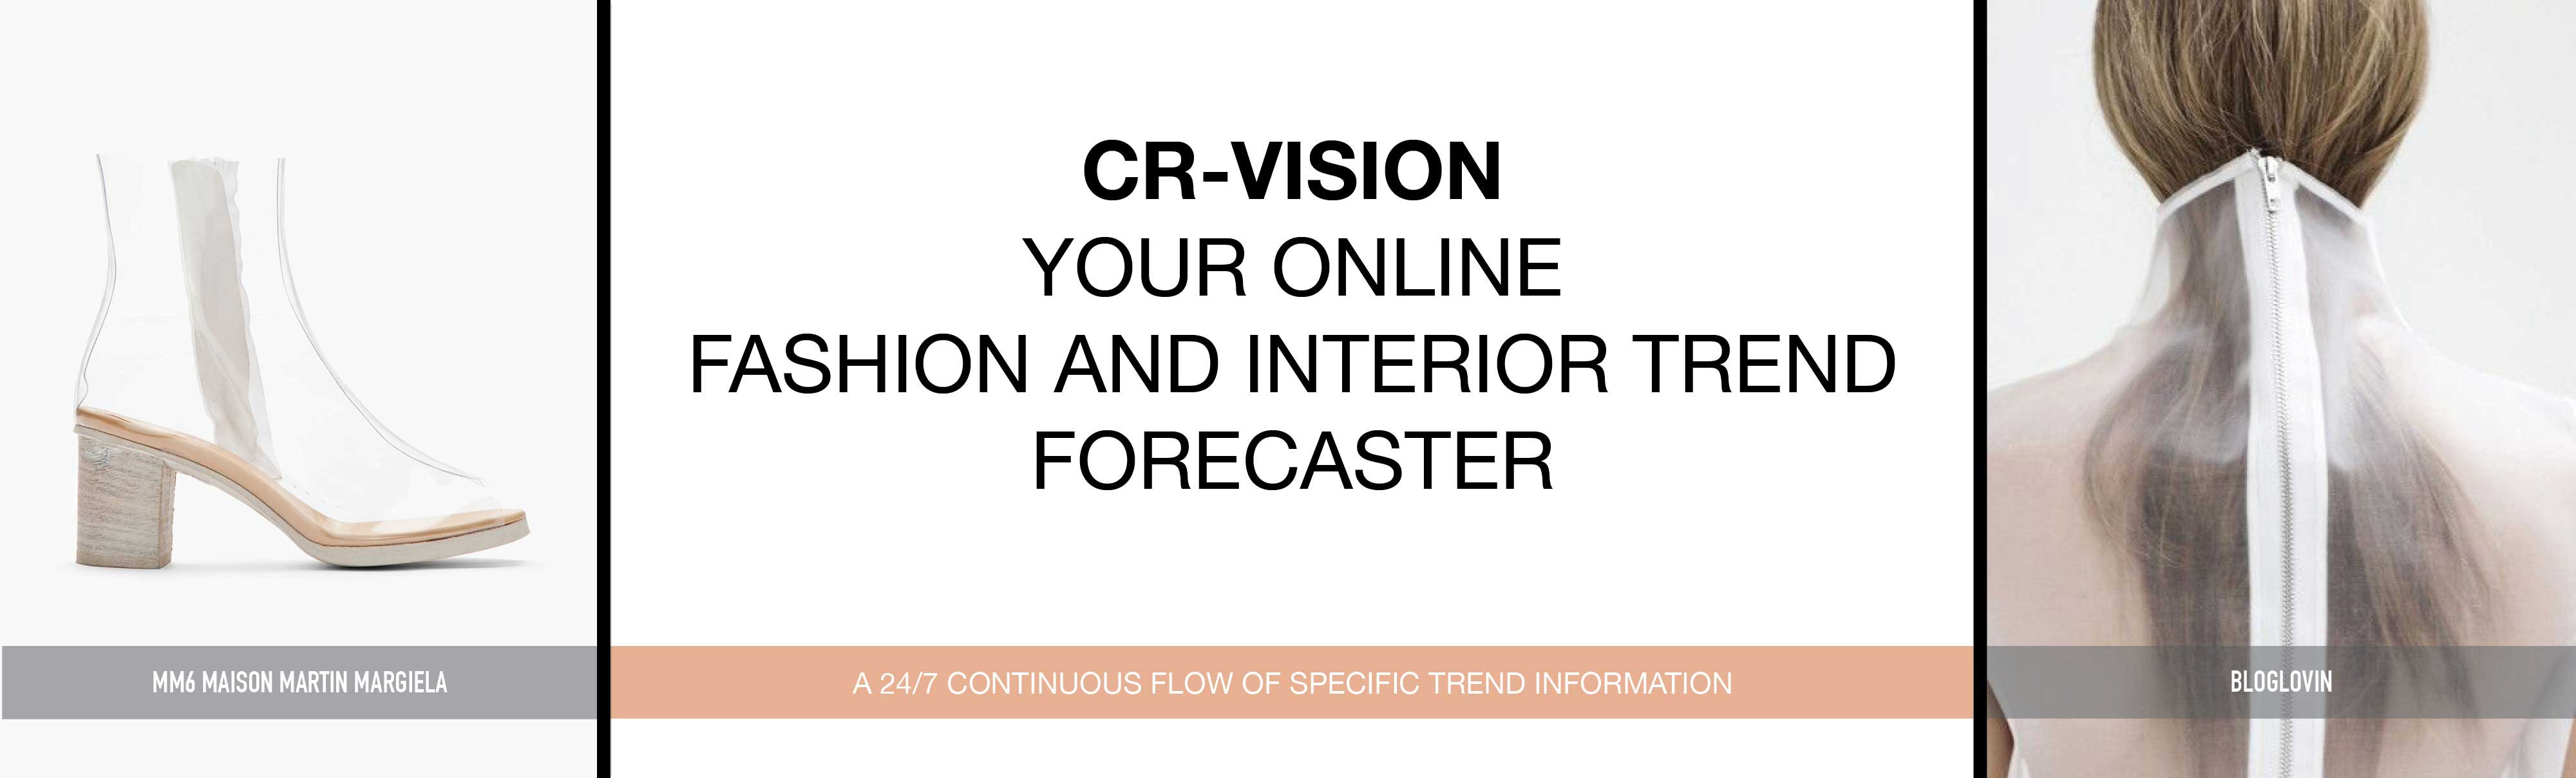 CR-Vision - Your online fashion interior trend forecaster